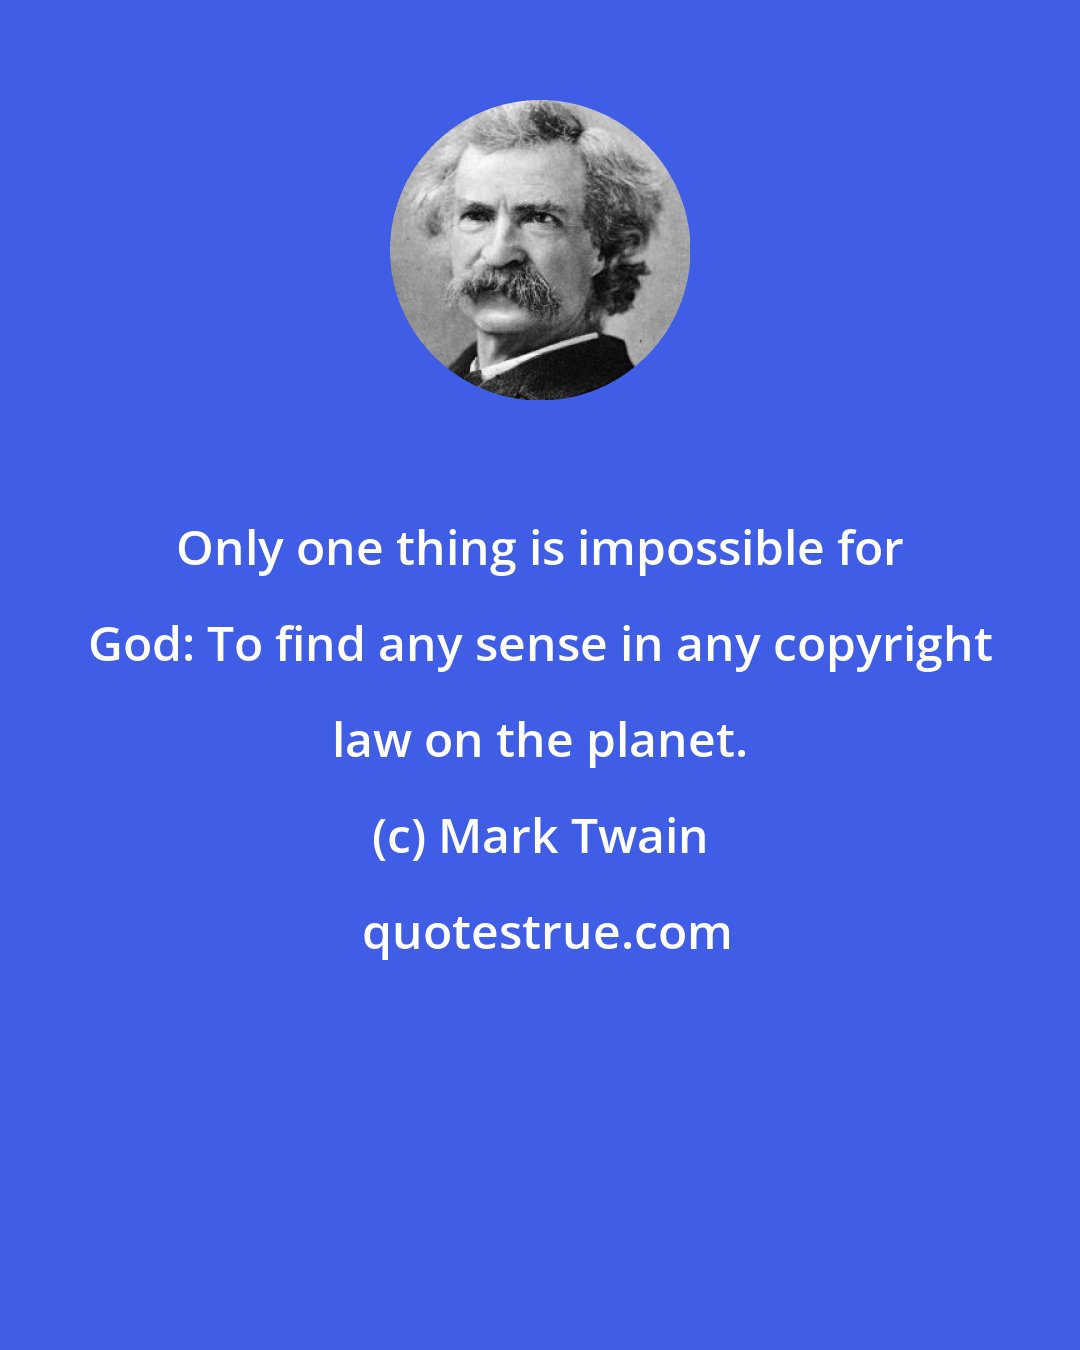 Mark Twain: Only one thing is impossible for God: To find any sense in any copyright law on the planet.